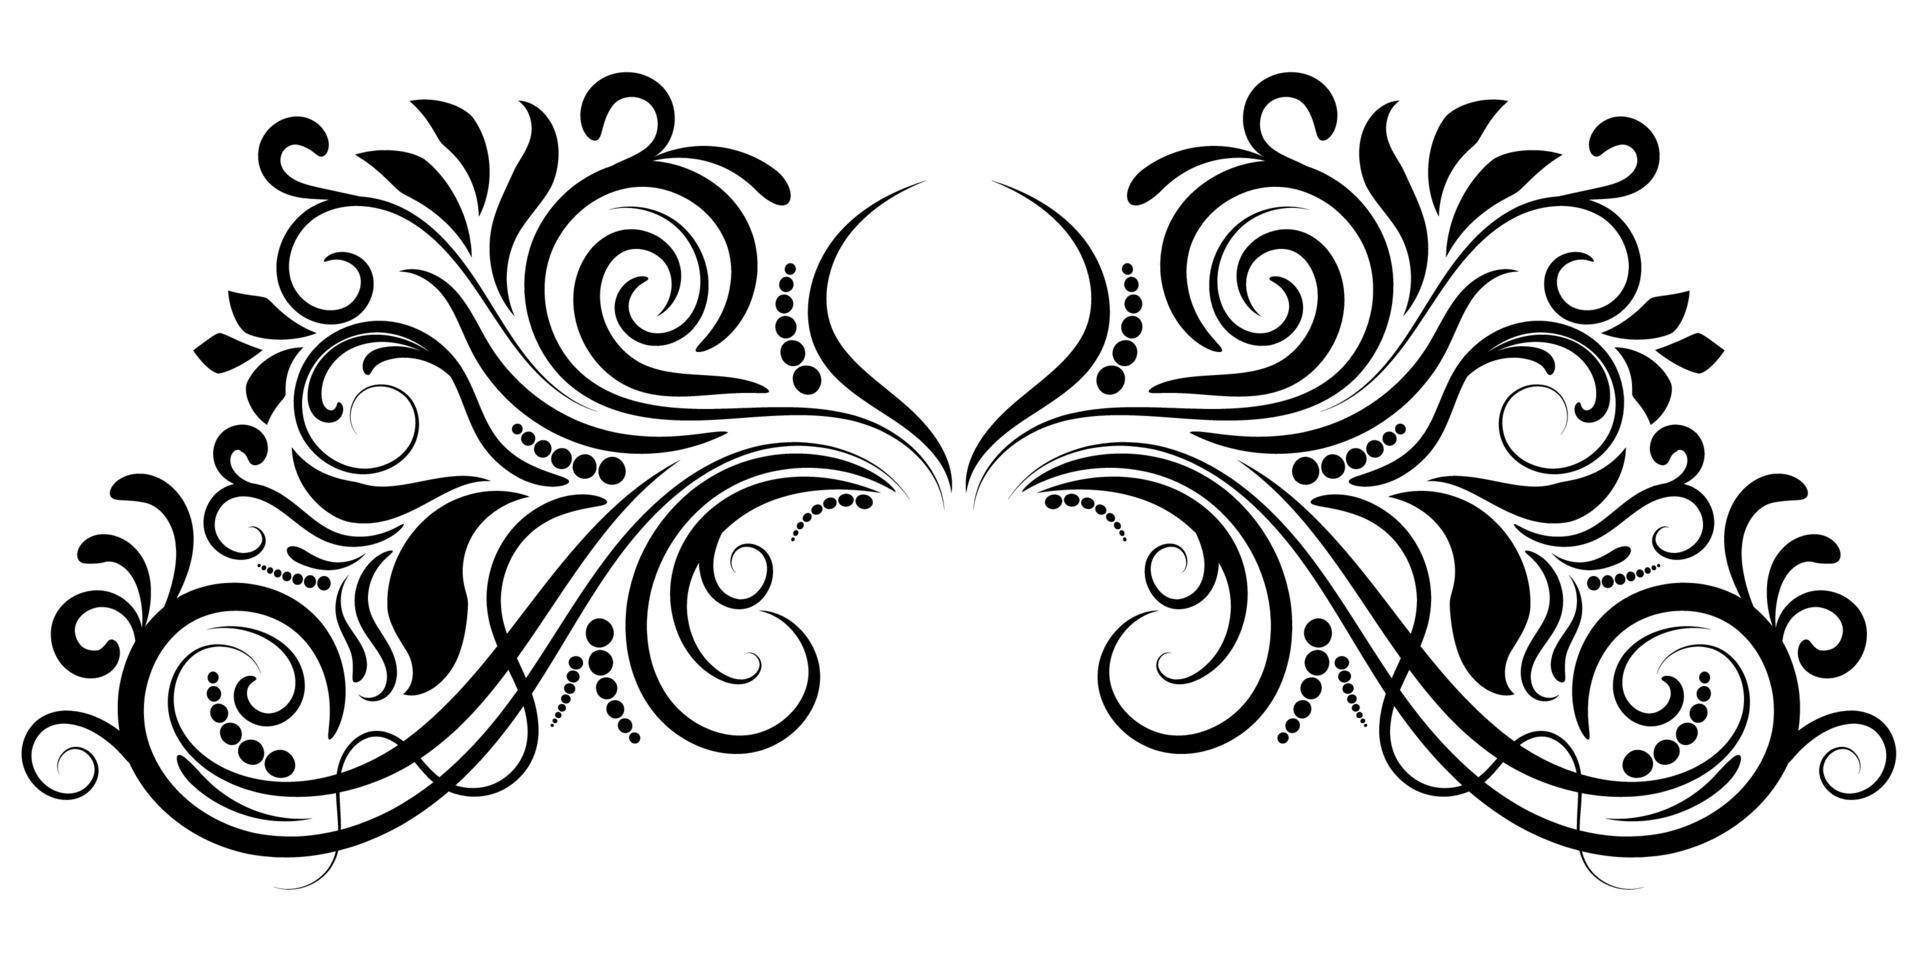 Abstract curly element for design, swirl, curl. vector